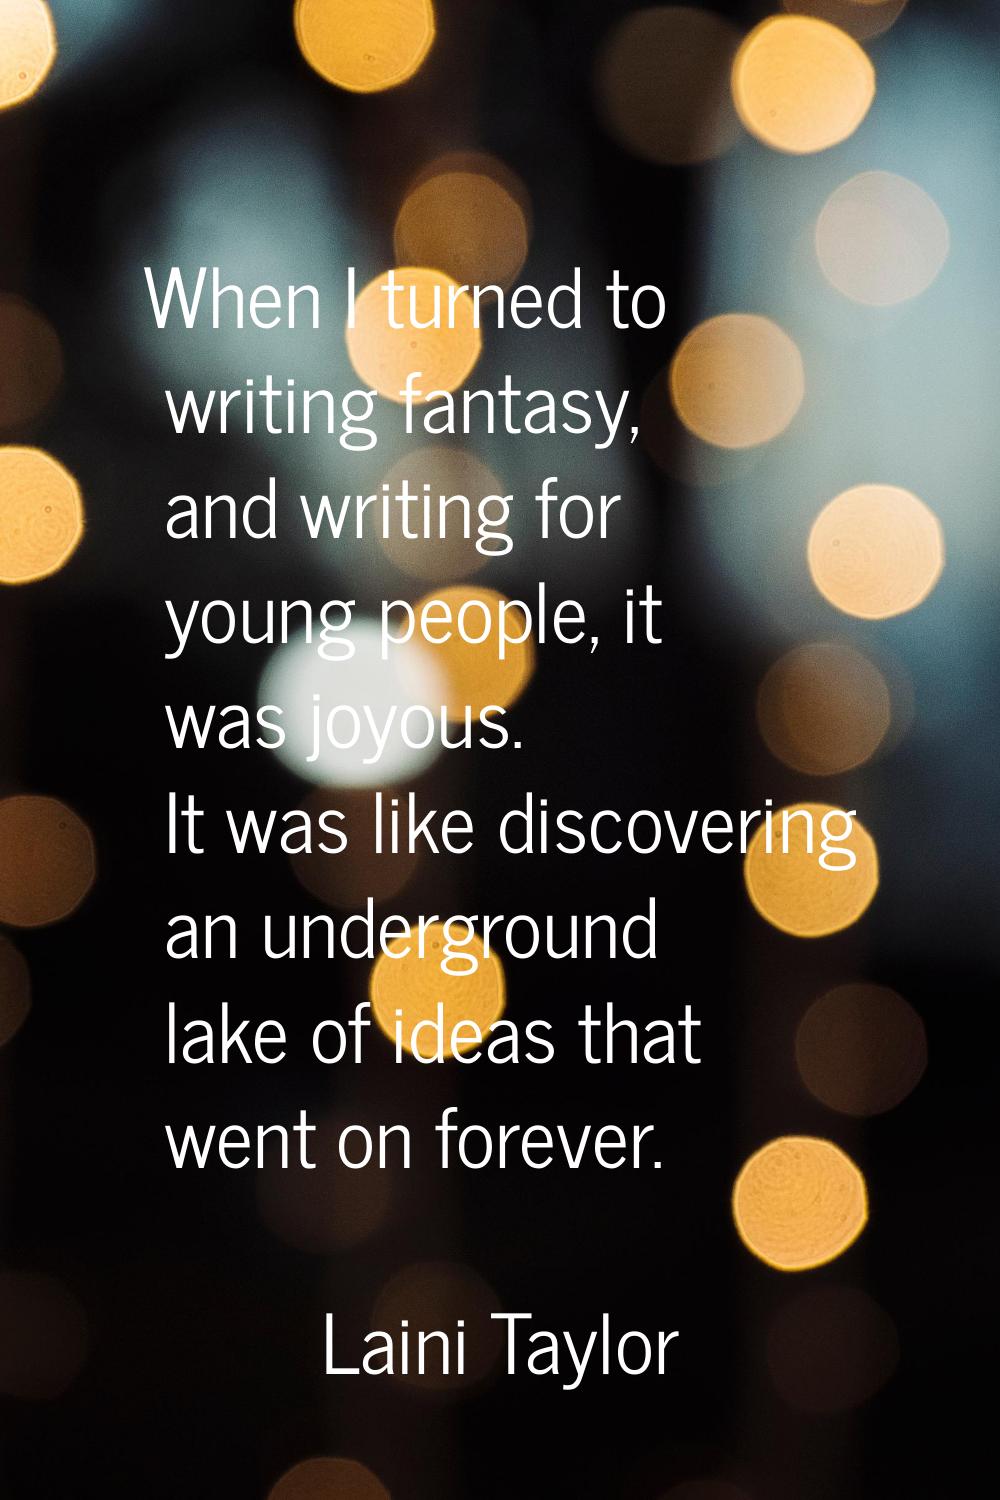 When I turned to writing fantasy, and writing for young people, it was joyous. It was like discover